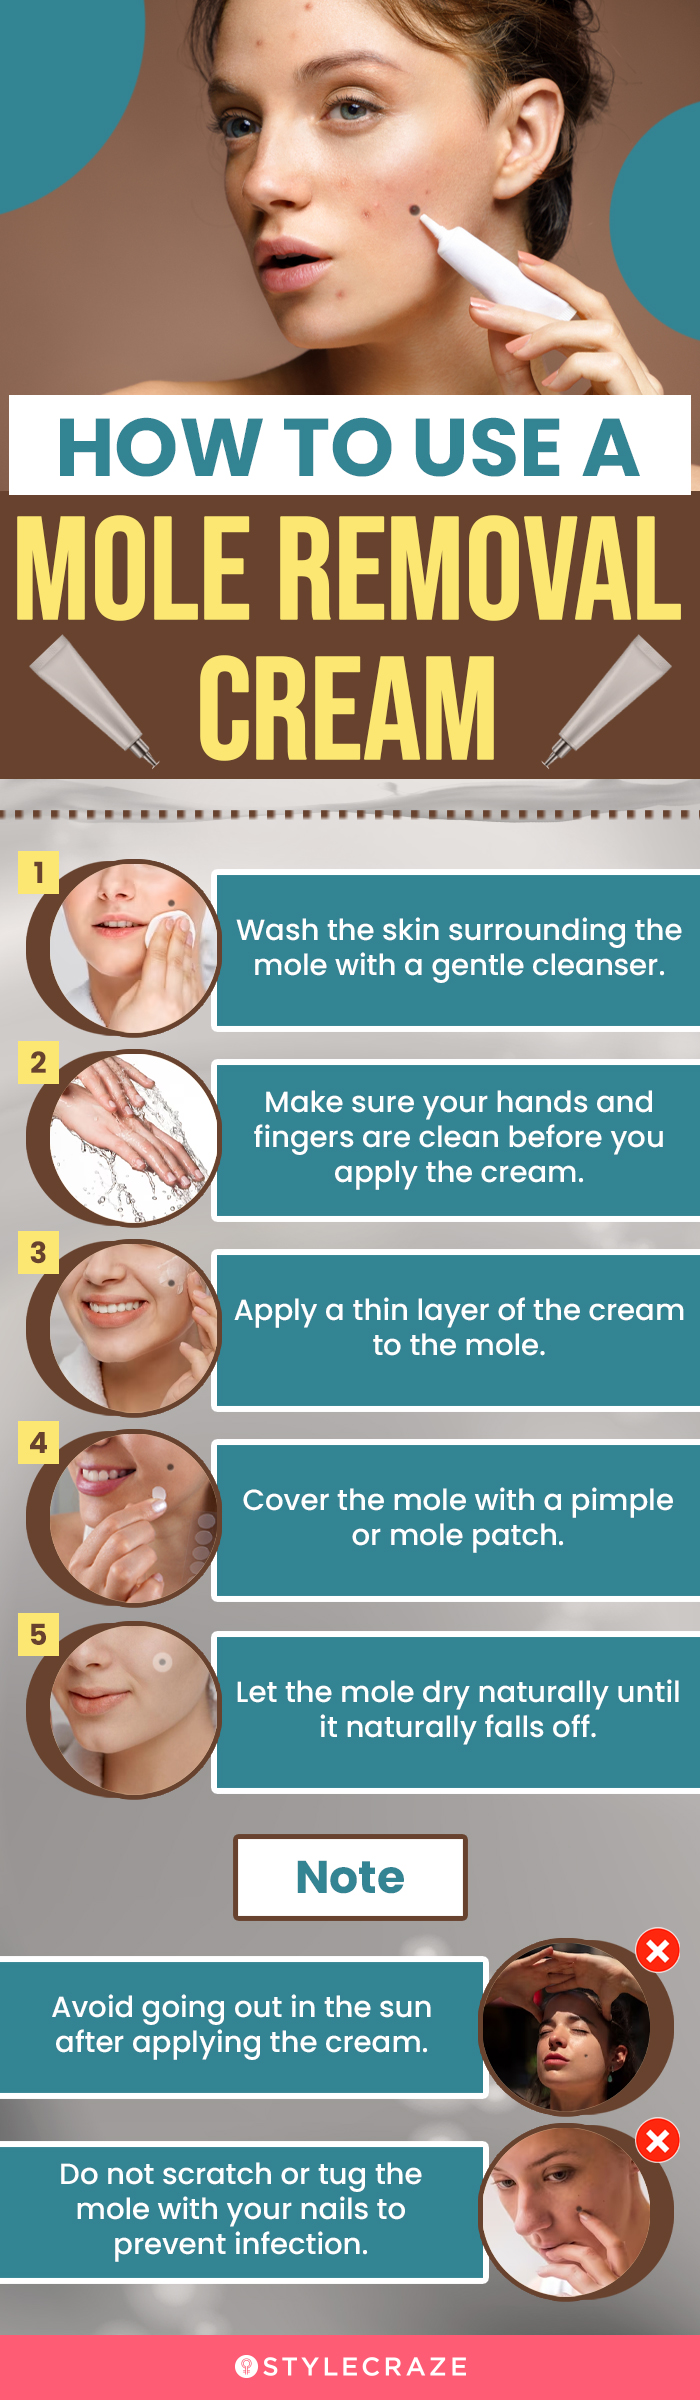 How To Use Mole Removal Cream (infographic)